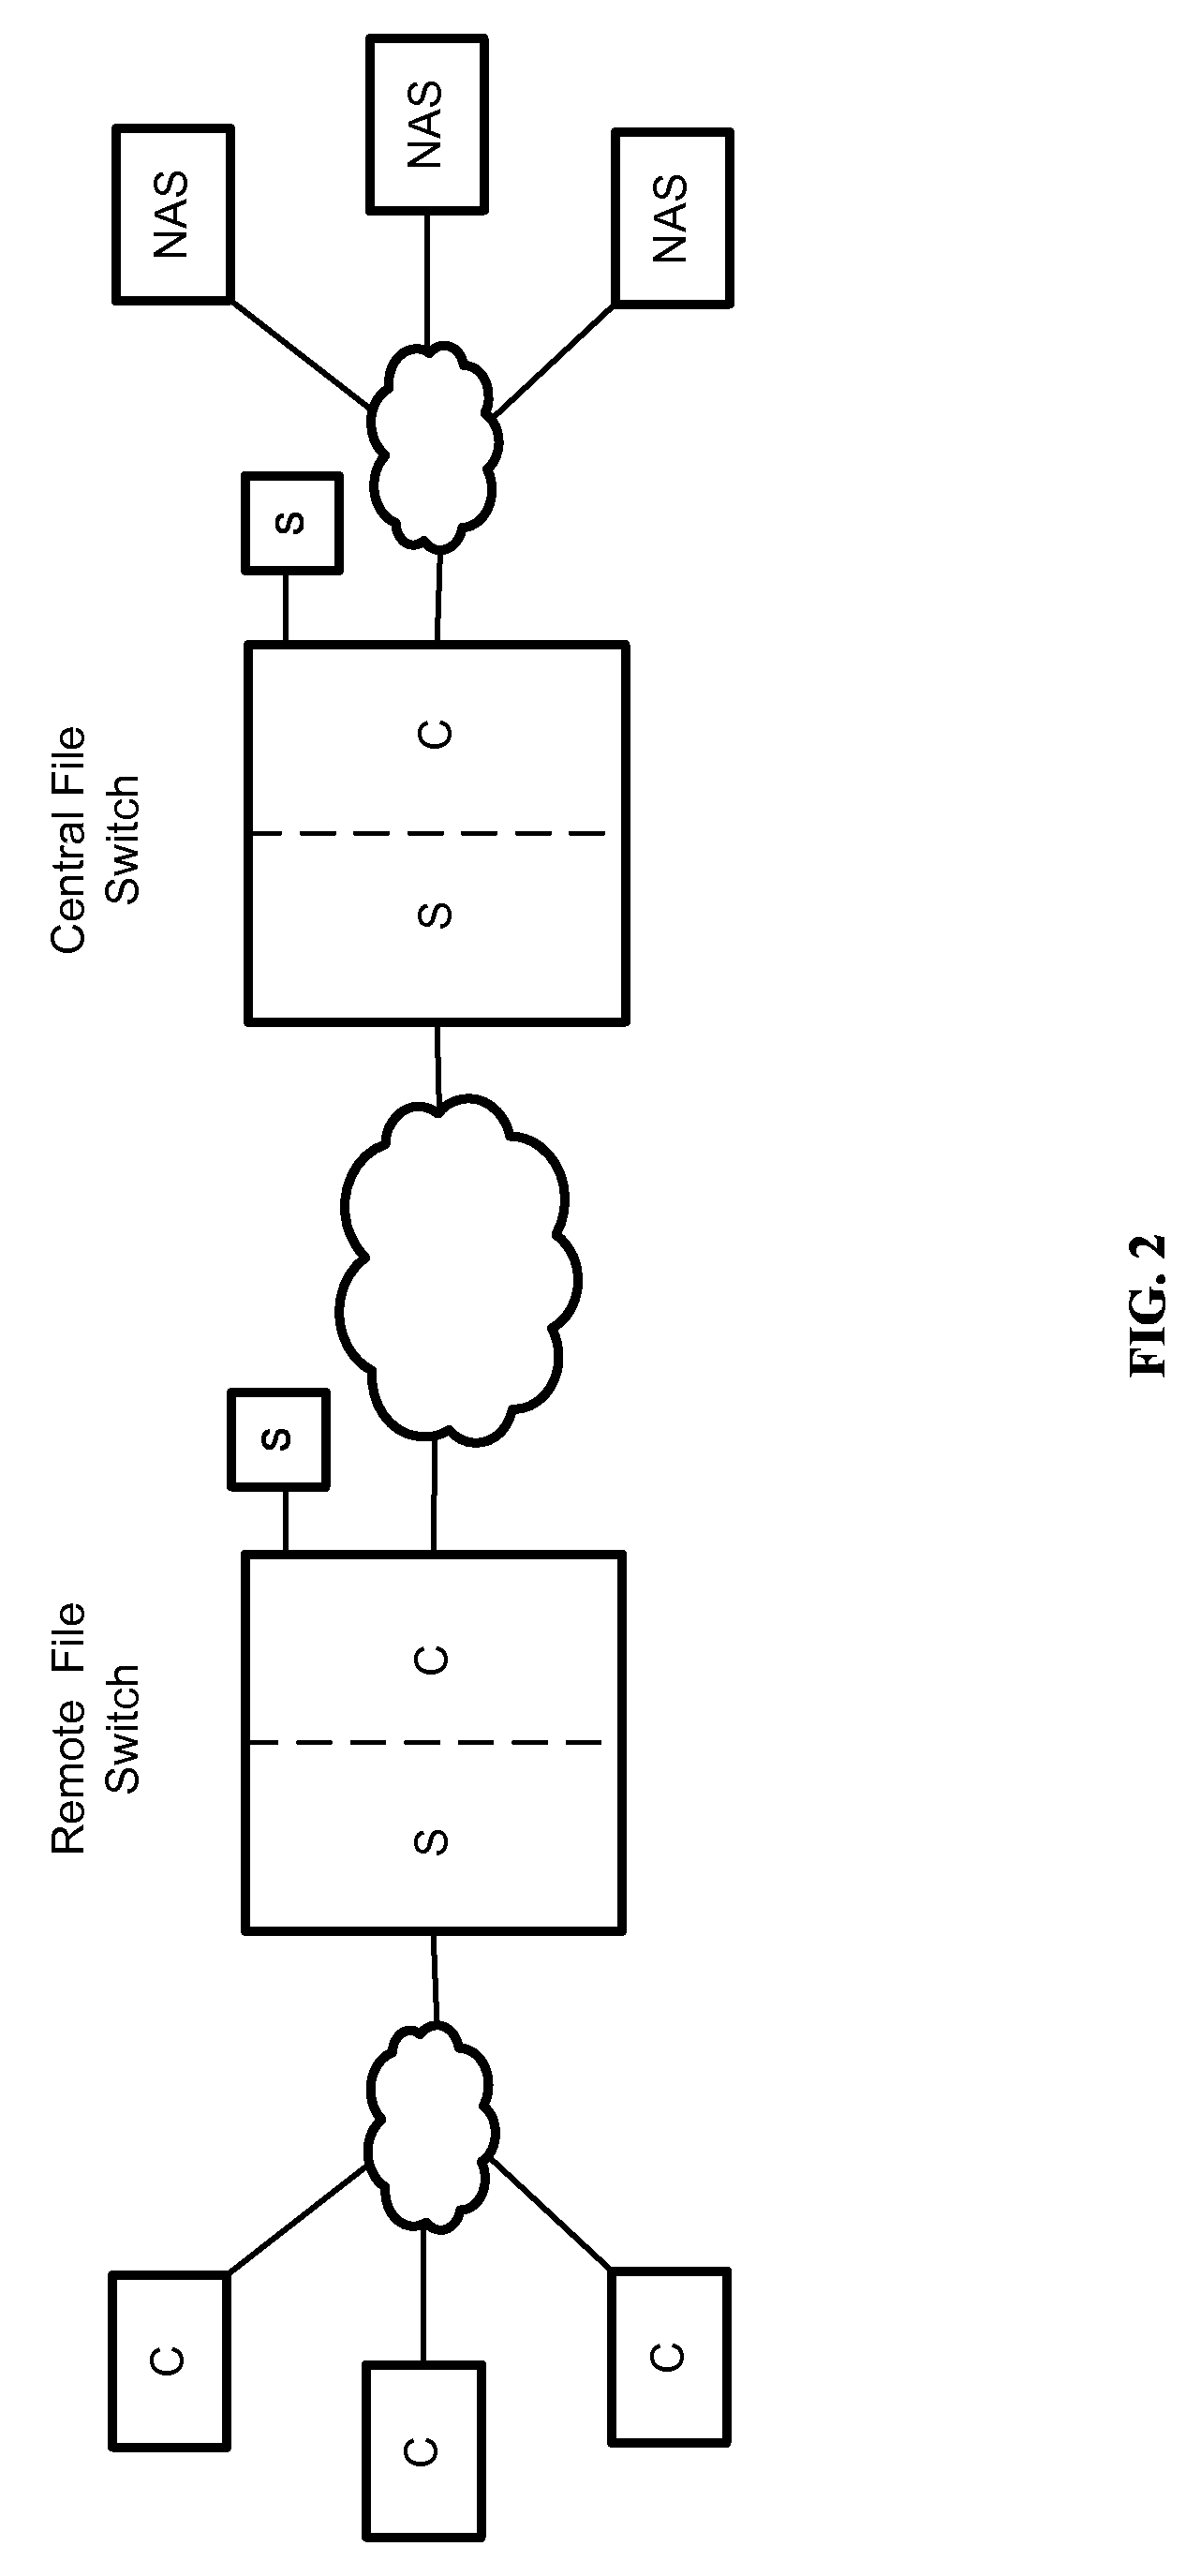 Remote file virtualization in a switched file system